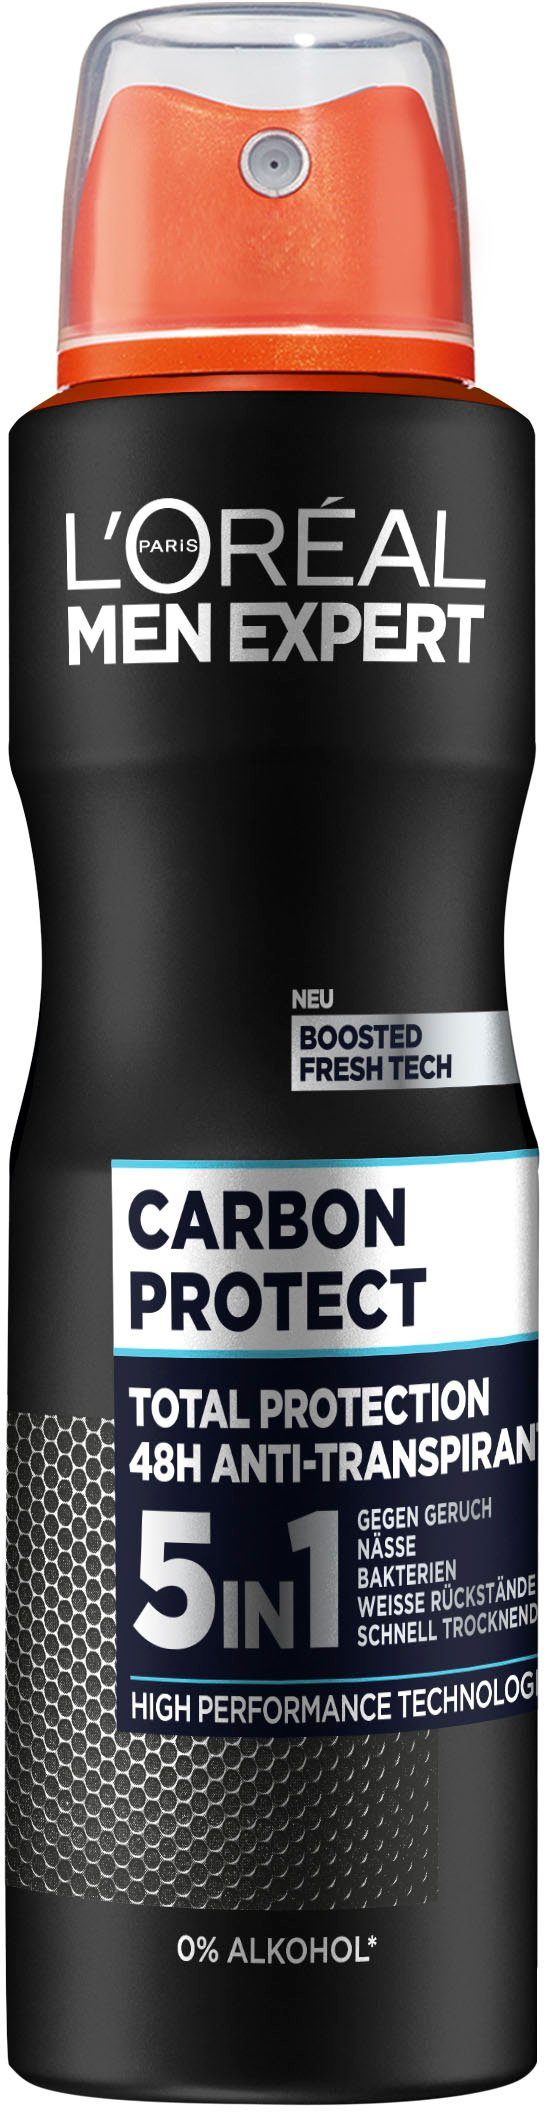 Packung, PARIS Protect EXPERT 5-in-1, L'ORÉAL Carbon MEN Spray Deo-Spray 6-tlg. Deo